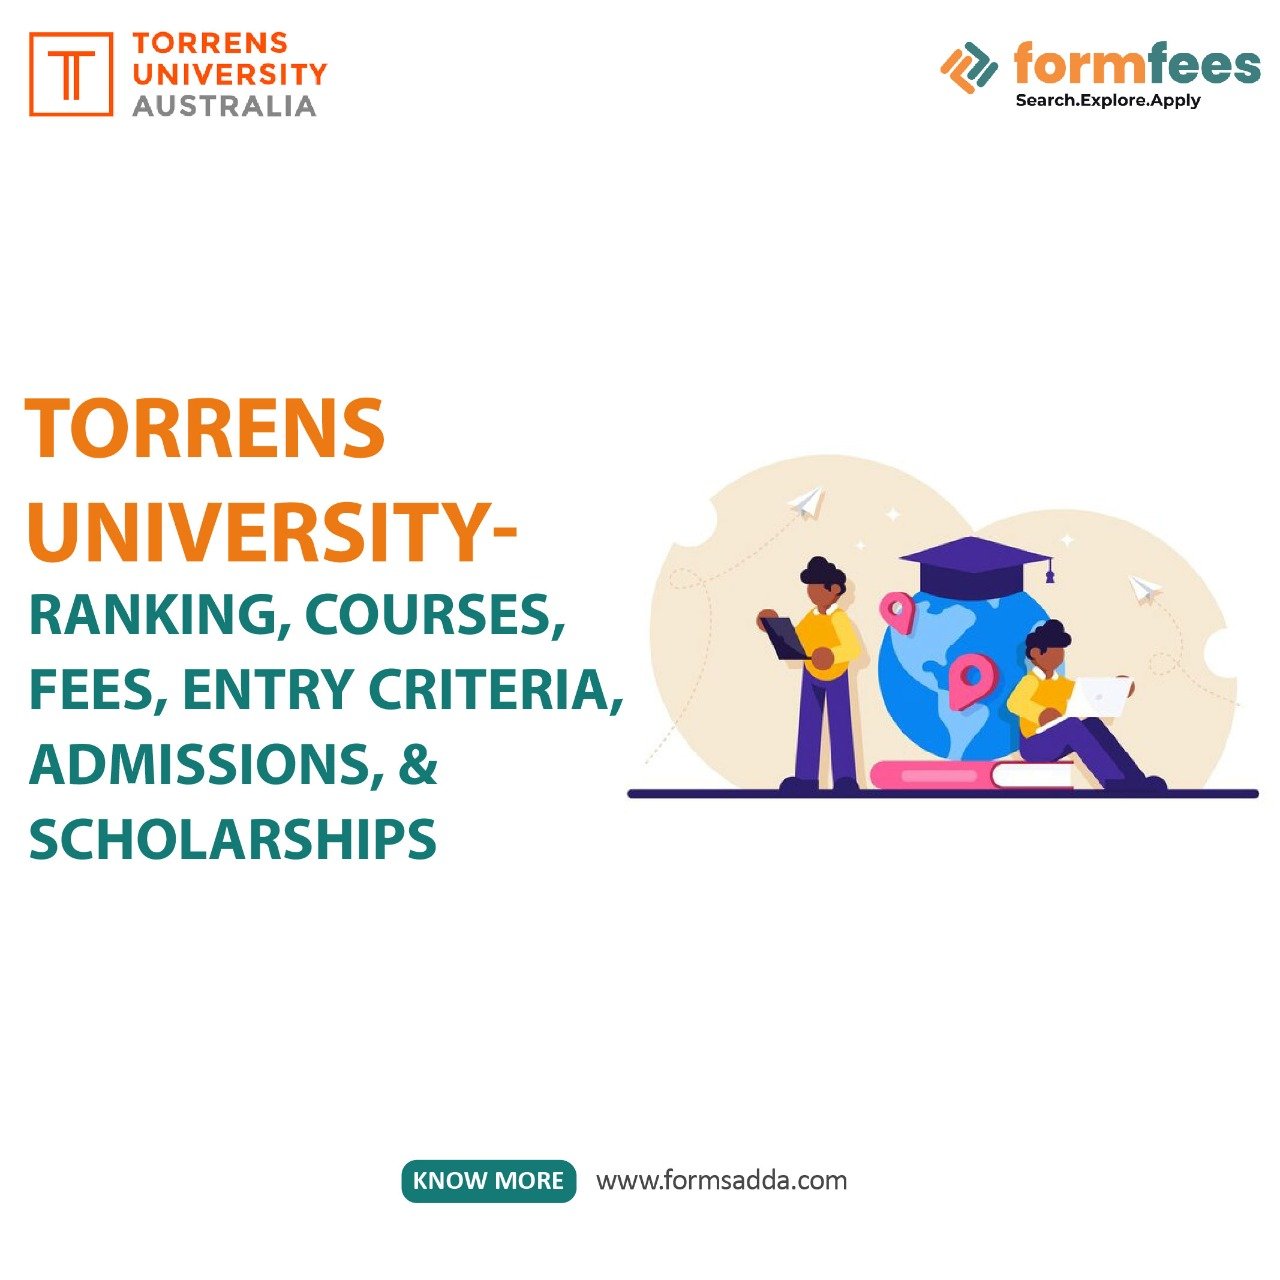 Torrens University Ranking, Courses, Fees, Entry Criteria, Admissions